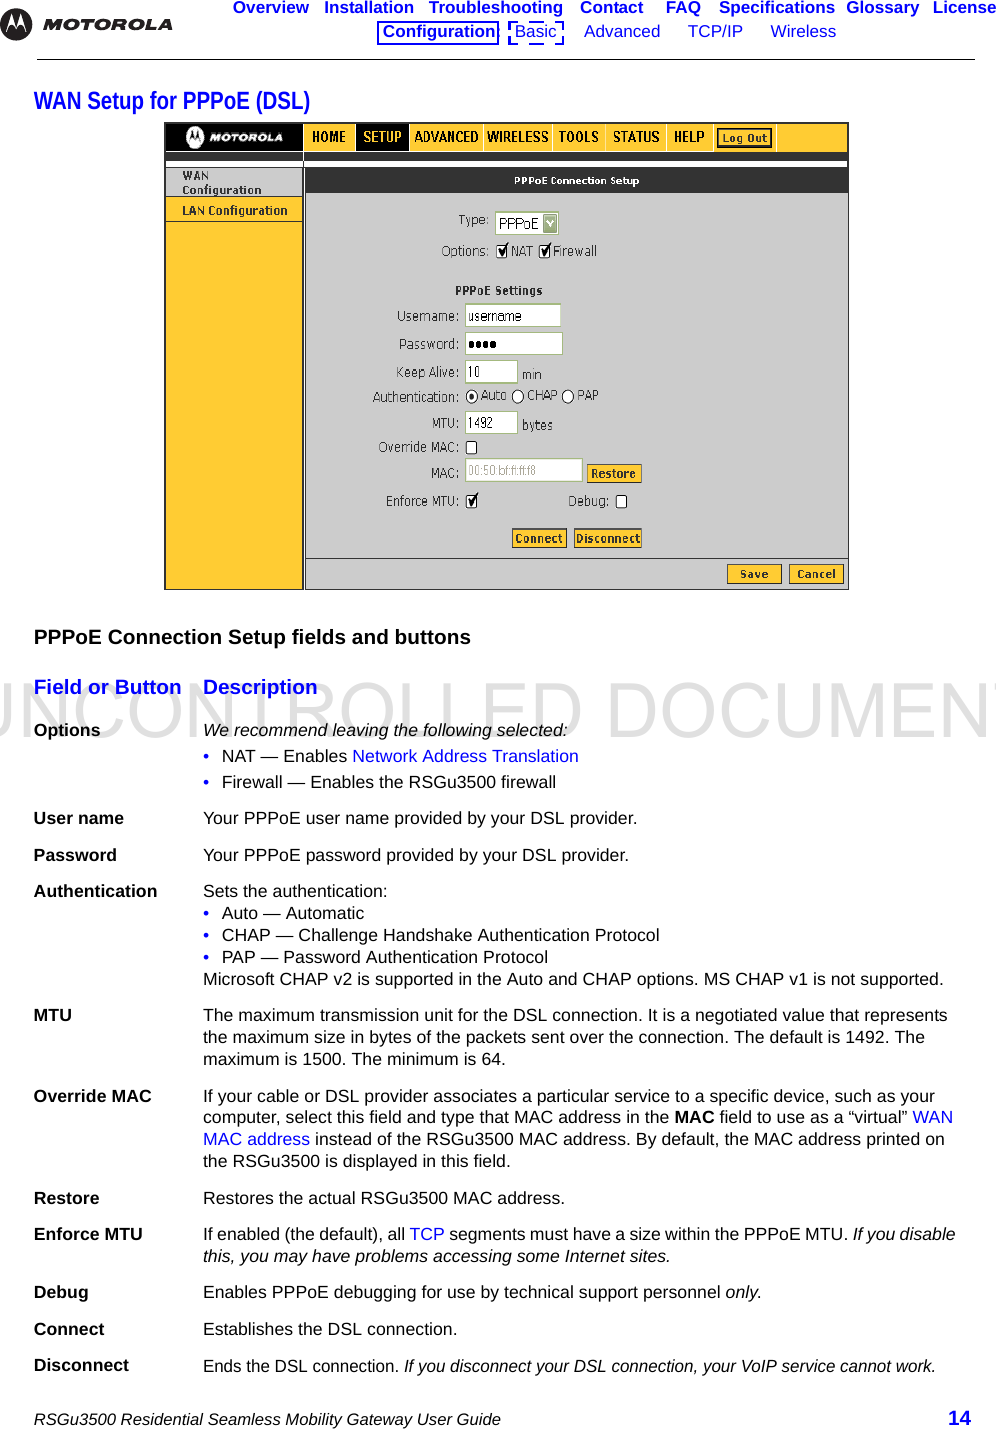 UNCONTROLLED DOCUMENTRSGu3500 Residential Seamless Mobility Gateway User Guide 14Overview Installation Troubleshooting Contact FAQ Specifications Glossary LicenseConfiguration:   Basic      Advanced      TCP/IP      Wireless    WAN Setup for PPPoE (DSL)PPPoE Connection Setup fields and buttonsField or Button DescriptionOptions We recommend leaving the following selected:•NAT — Enables Network Address Translation•Firewall — Enables the RSGu3500 firewallUser name Your PPPoE user name provided by your DSL provider.Password Your PPPoE password provided by your DSL provider.Authentication Sets the authentication: •Auto — Automatic•CHAP — Challenge Handshake Authentication Protocol•PAP — Password Authentication ProtocolMicrosoft CHAP v2 is supported in the Auto and CHAP options. MS CHAP v1 is not supported.MTU The maximum transmission unit for the DSL connection. It is a negotiated value that represents the maximum size in bytes of the packets sent over the connection. The default is 1492. The maximum is 1500. The minimum is 64.Override MAC If your cable or DSL provider associates a particular service to a specific device, such as your computer, select this field and type that MAC address in the MAC field to use as a “virtual” WAN MAC address instead of the RSGu3500 MAC address. By default, the MAC address printed on the RSGu3500 is displayed in this field.Restore Restores the actual RSGu3500 MAC address.Enforce MTU If enabled (the default), all TCP segments must have a size within the PPPoE MTU. If you disable this, you may have problems accessing some Internet sites.Debug Enables PPPoE debugging for use by technical support personnel only.Connect Establishes the DSL connection.DisconnectEnds the DSL connection. If you disconnect your DSL connection, your VoIP service cannot work.